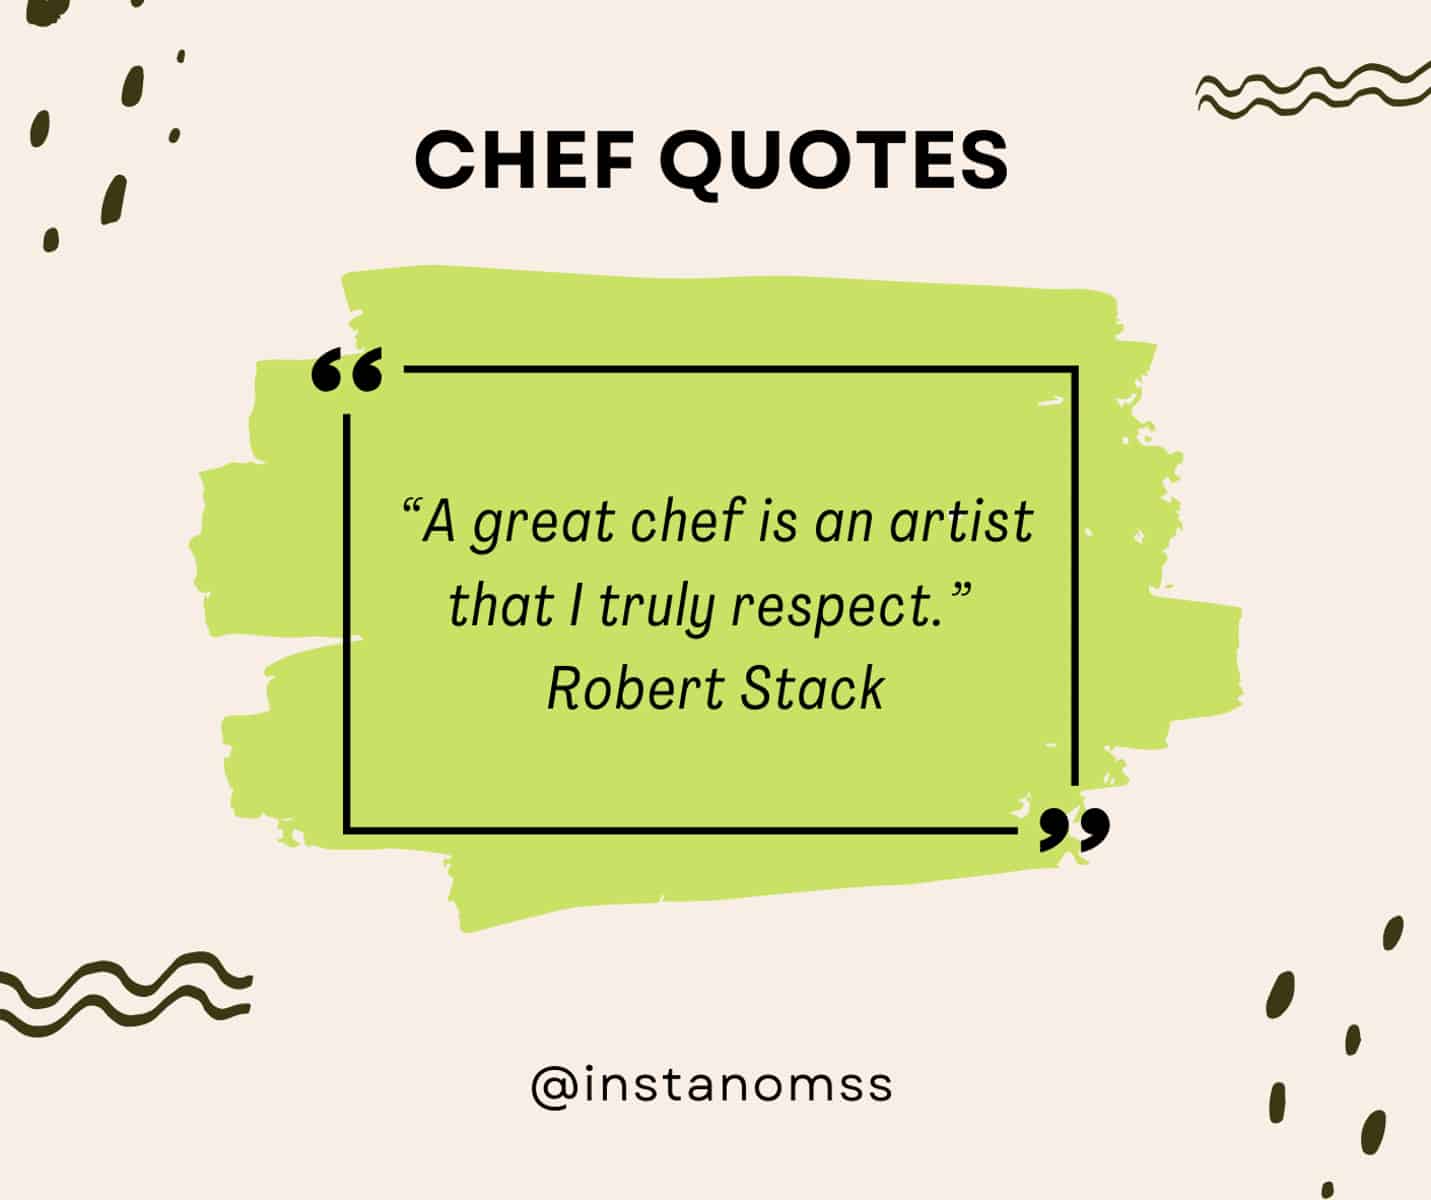 “A great chef is an artist that I truly respect.” Robert Stack